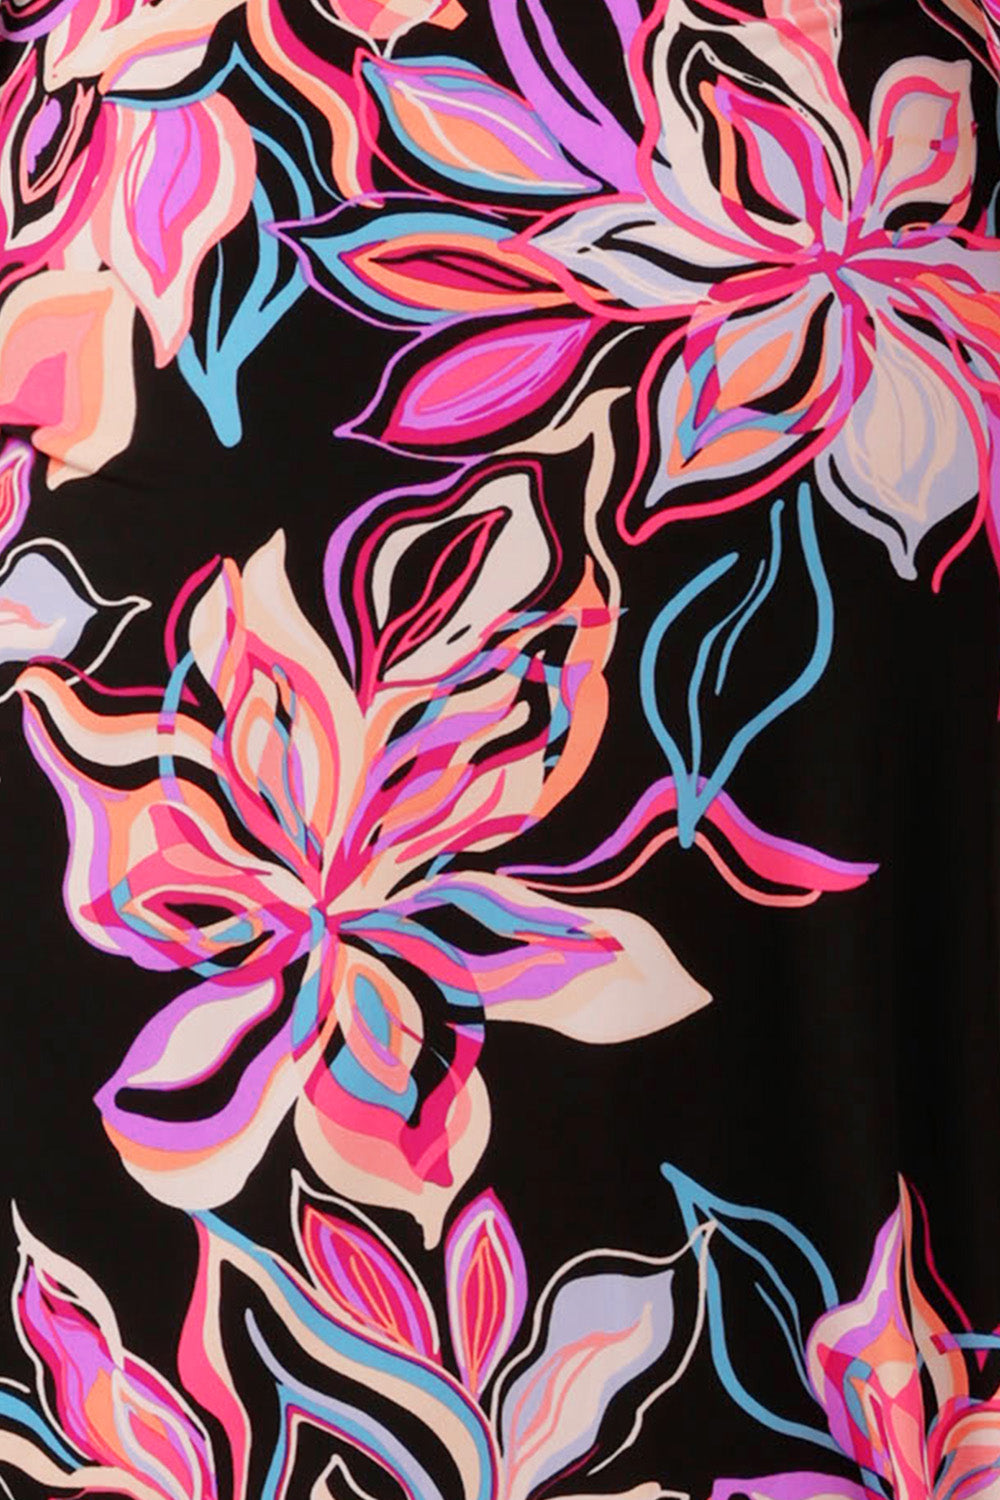 swatch of Australian and New Zealand women's clothing label, L&F's black-base floral print on dry touch jersey fabric, used in their range of jersey wrap dresses and work wear tops. 